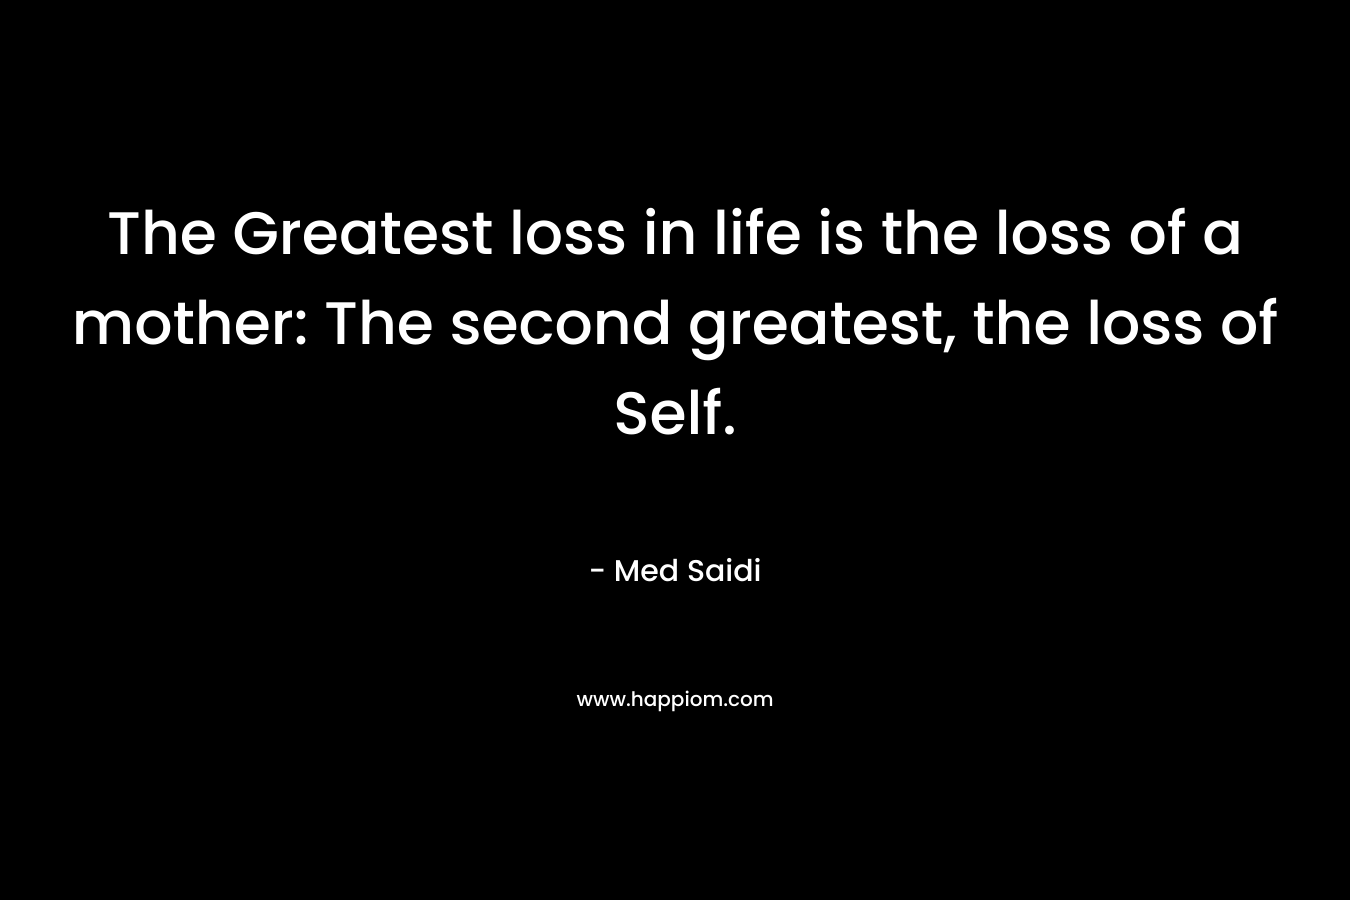 The Greatest loss in life is the loss of a mother: The second greatest, the loss of Self.